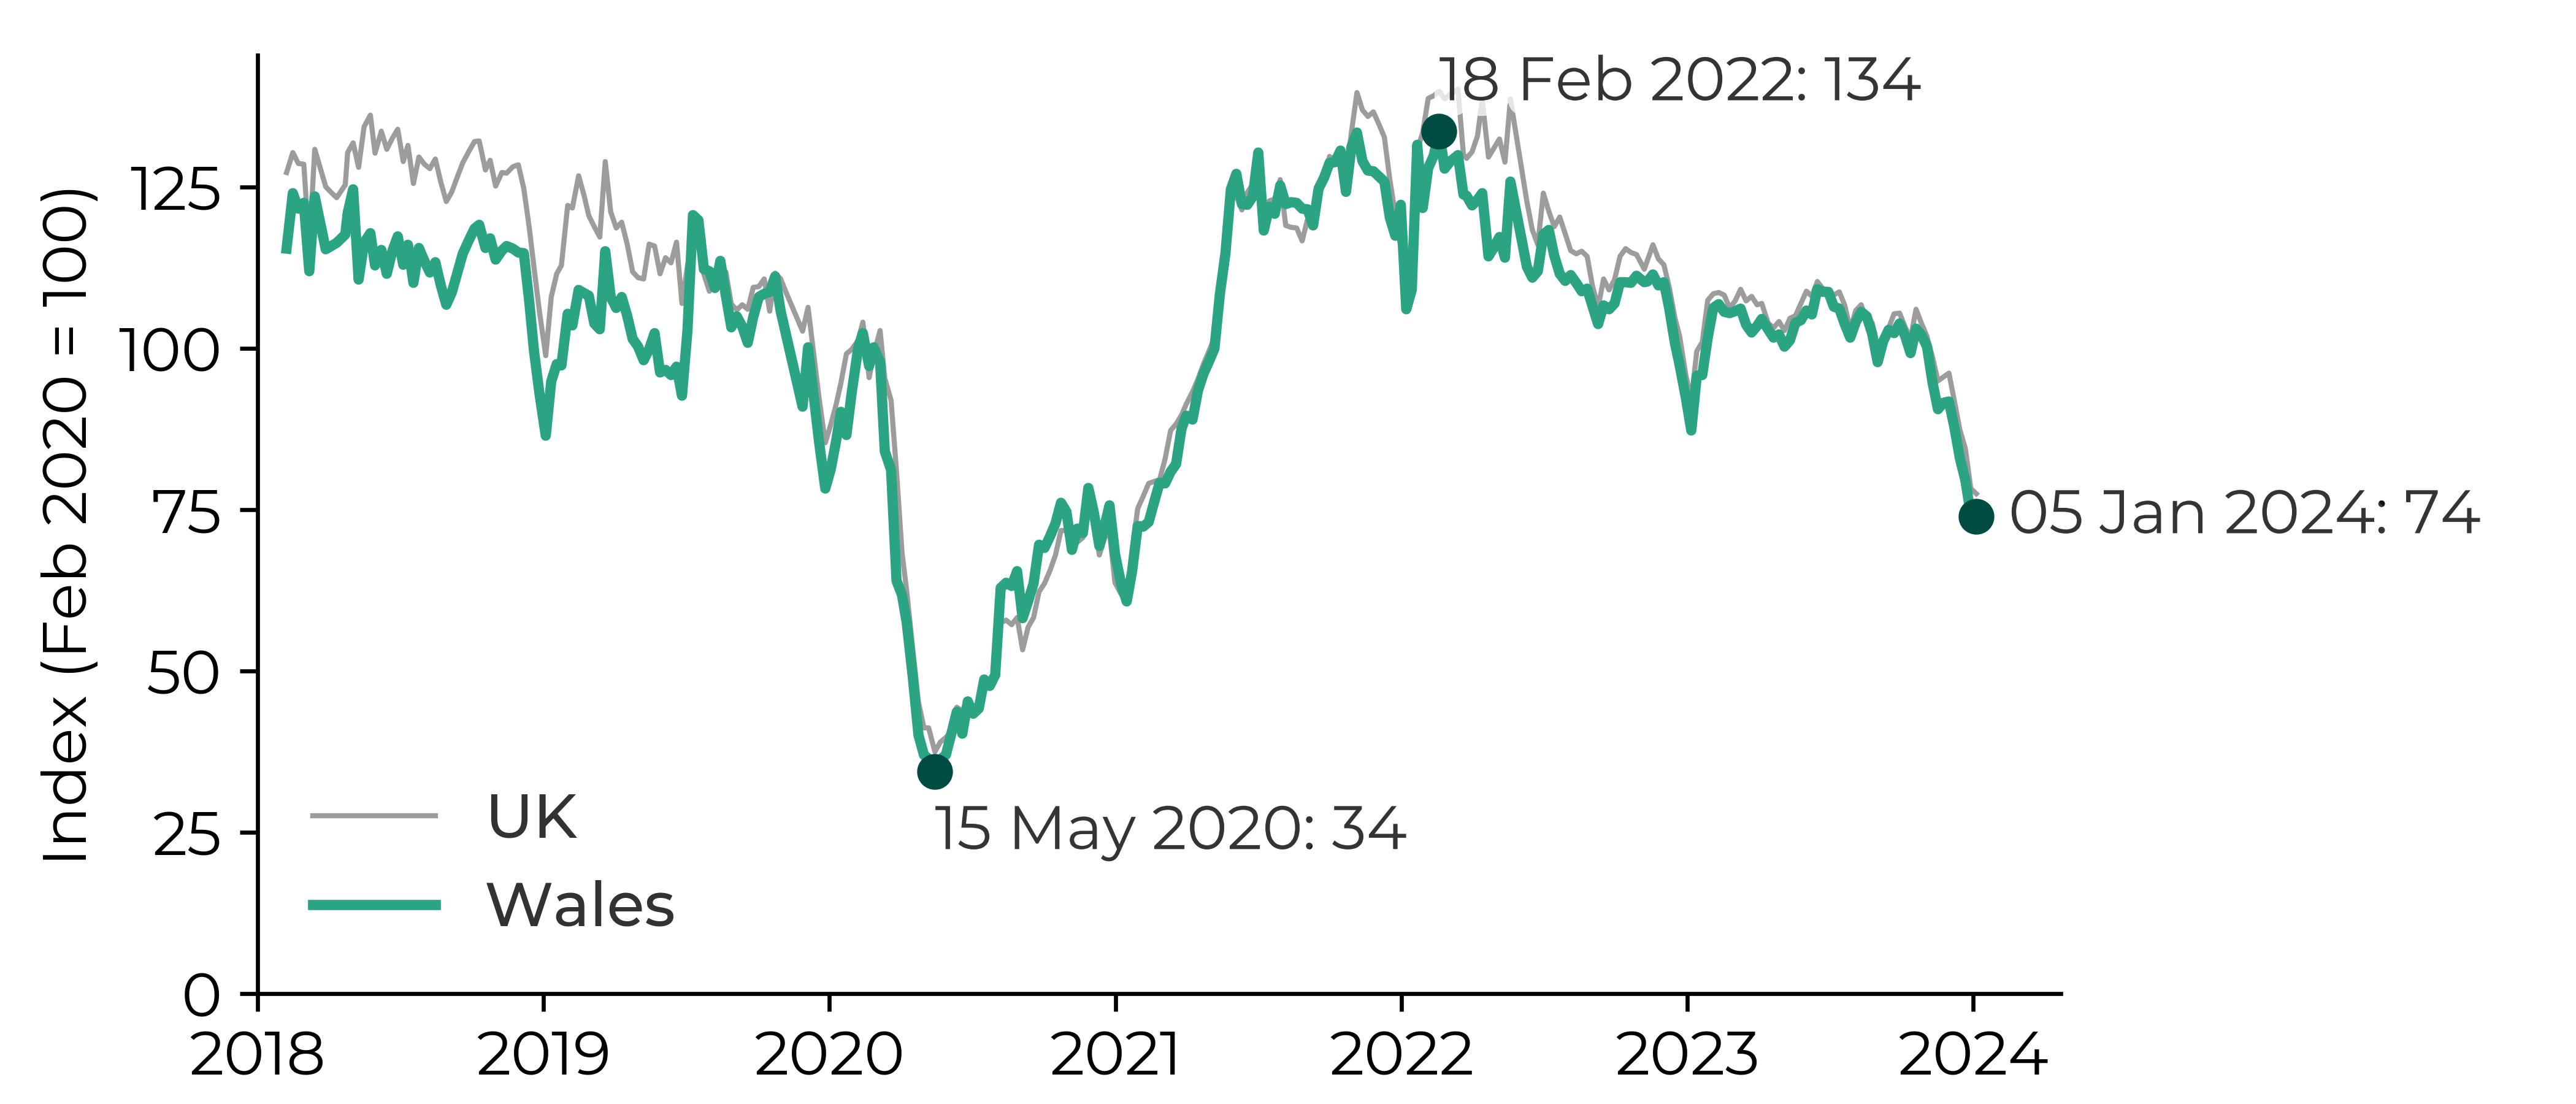 Graph showing that the index decreased from 100 in February 2020 to 34 in May 2020. The index increased to 134 by February 2022 and decreased to 74 by January 2024.